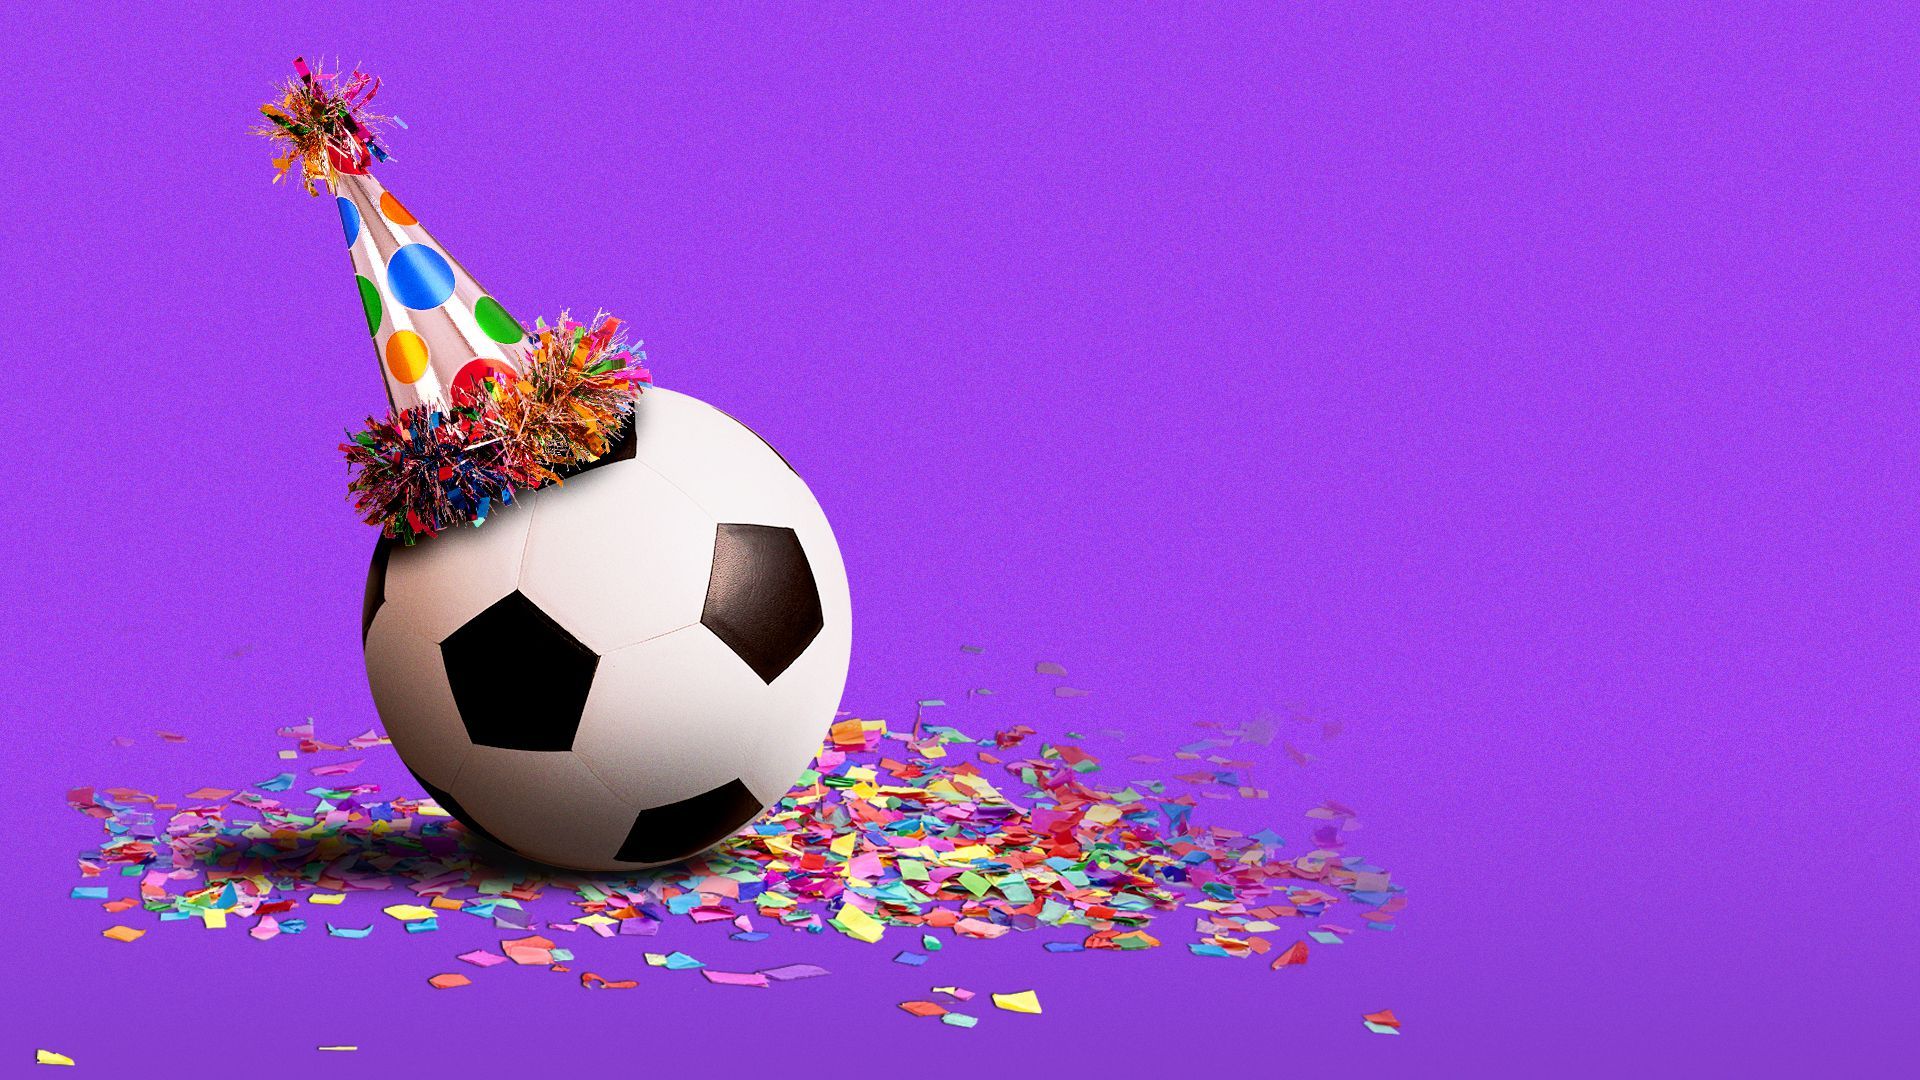 Illustration of a soccer ball wearing a party hat, surrounded by confetti. 